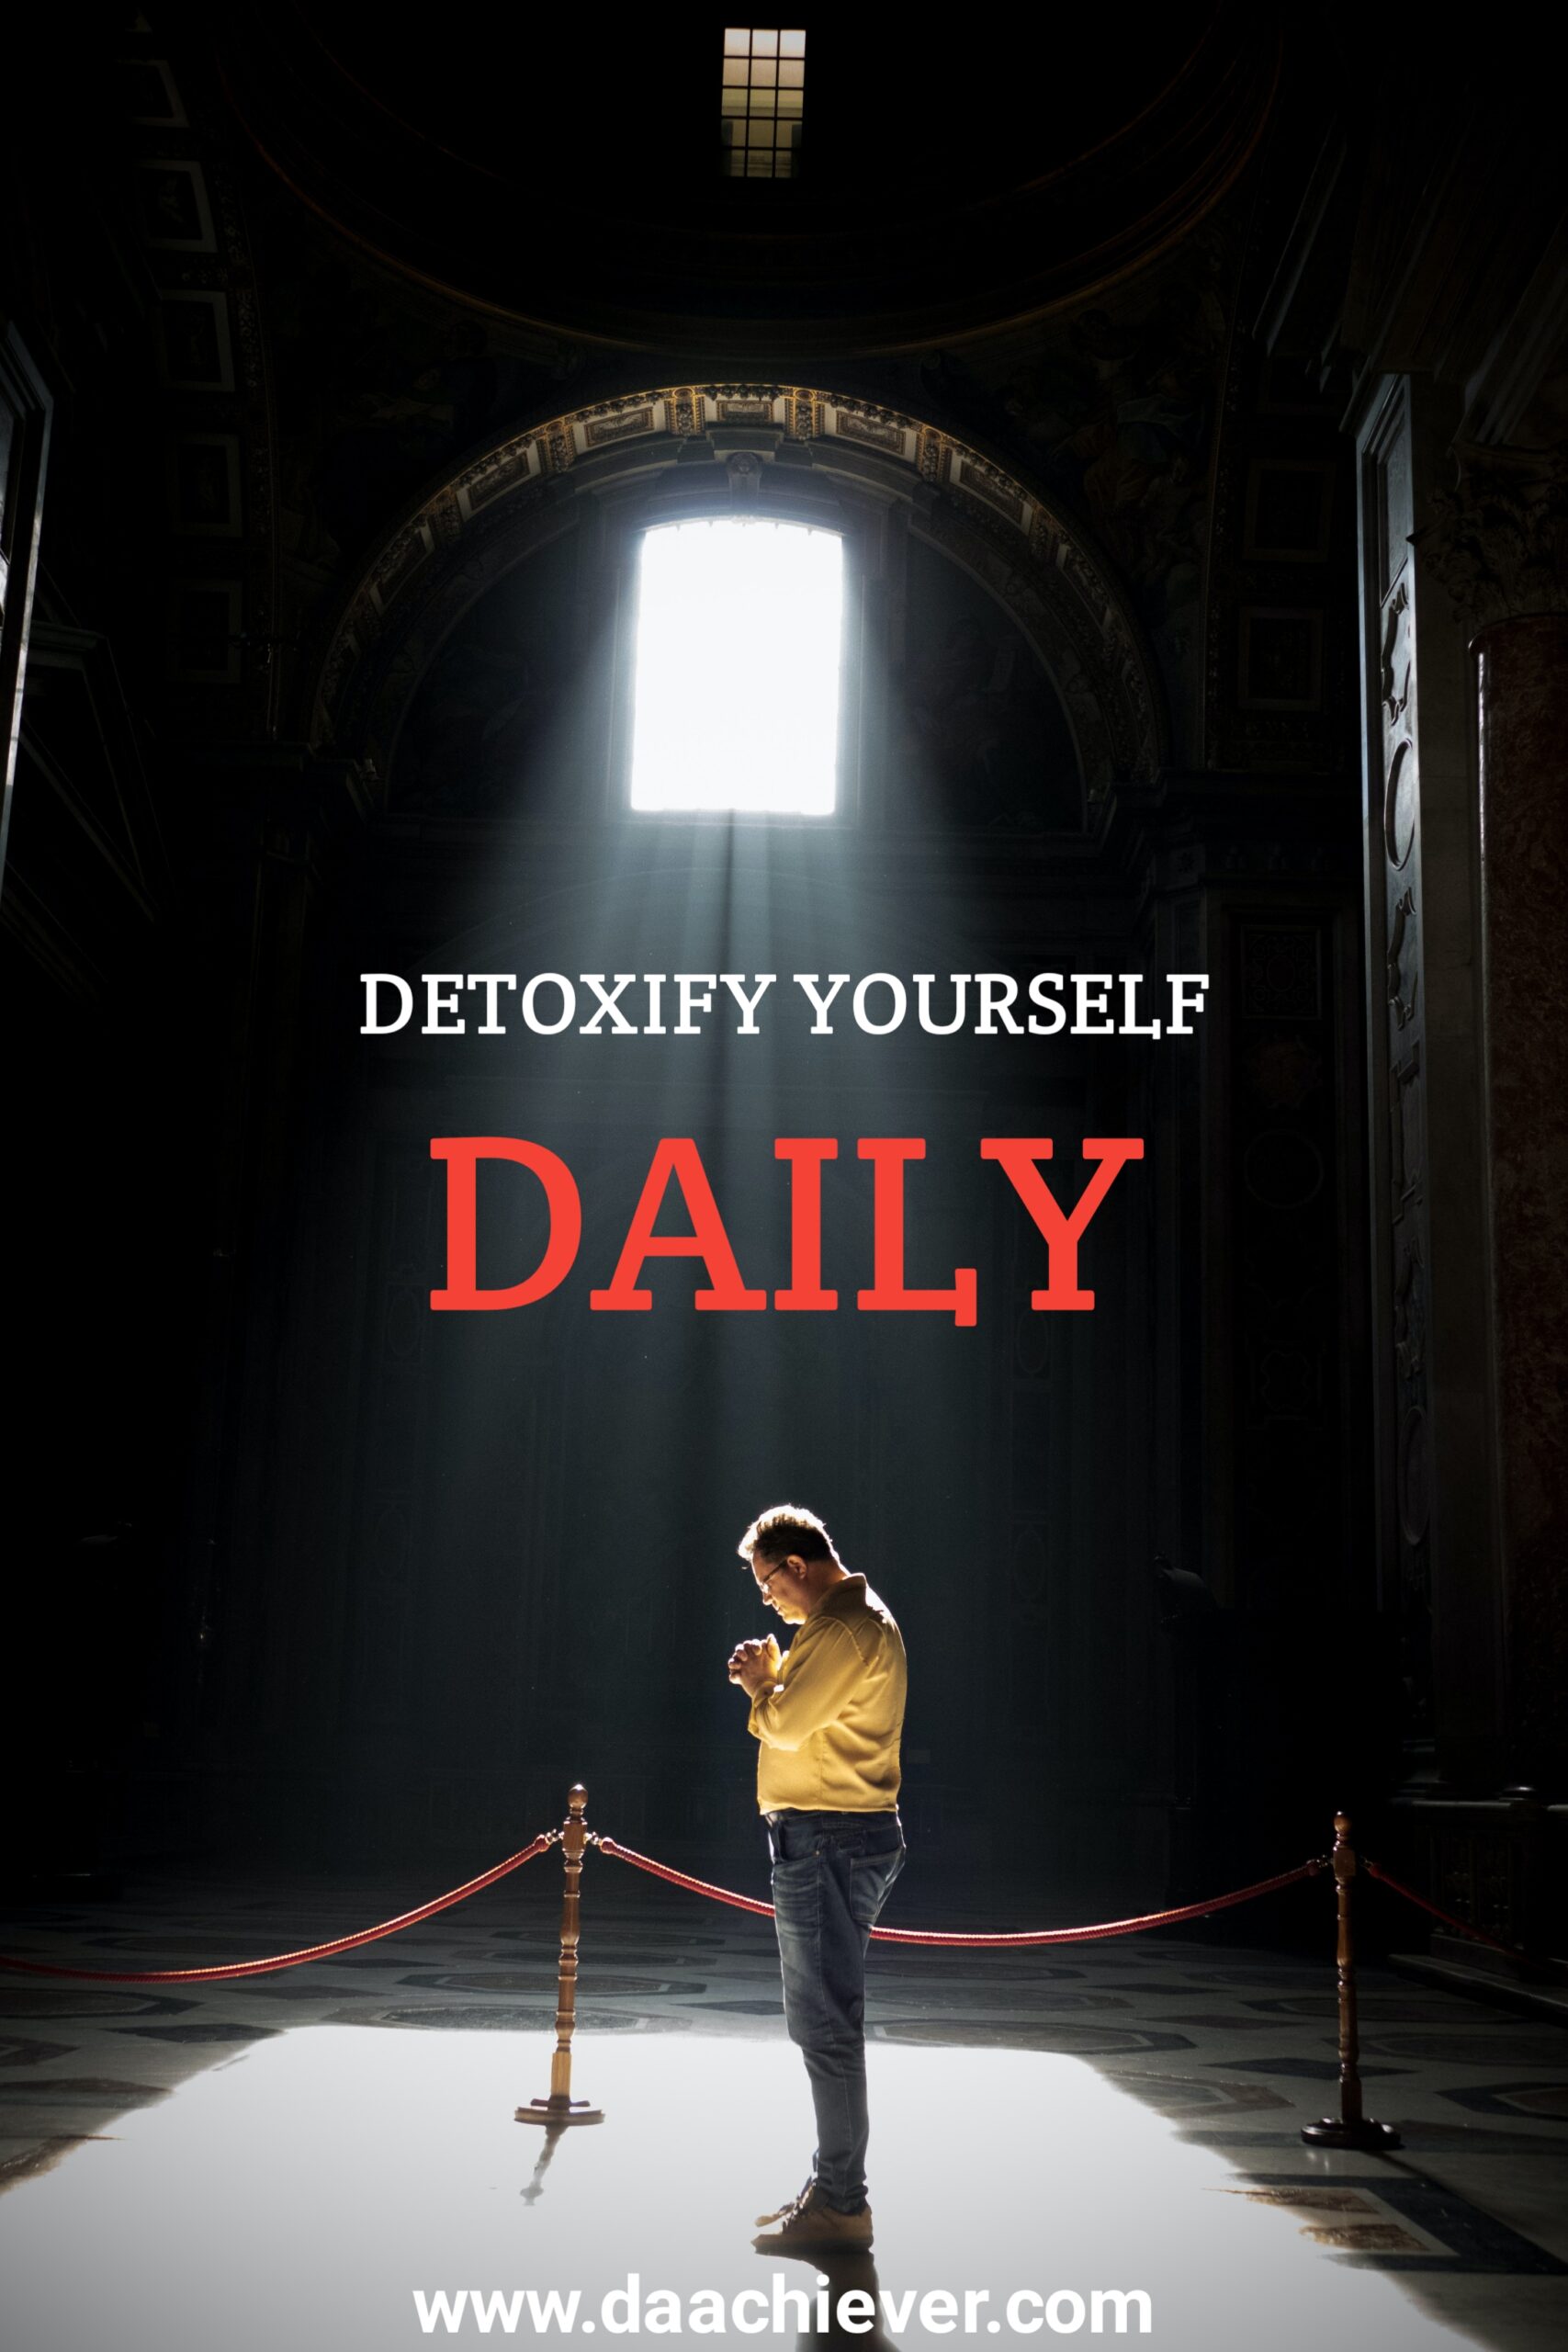 Detoxify Yourself Daily scaled